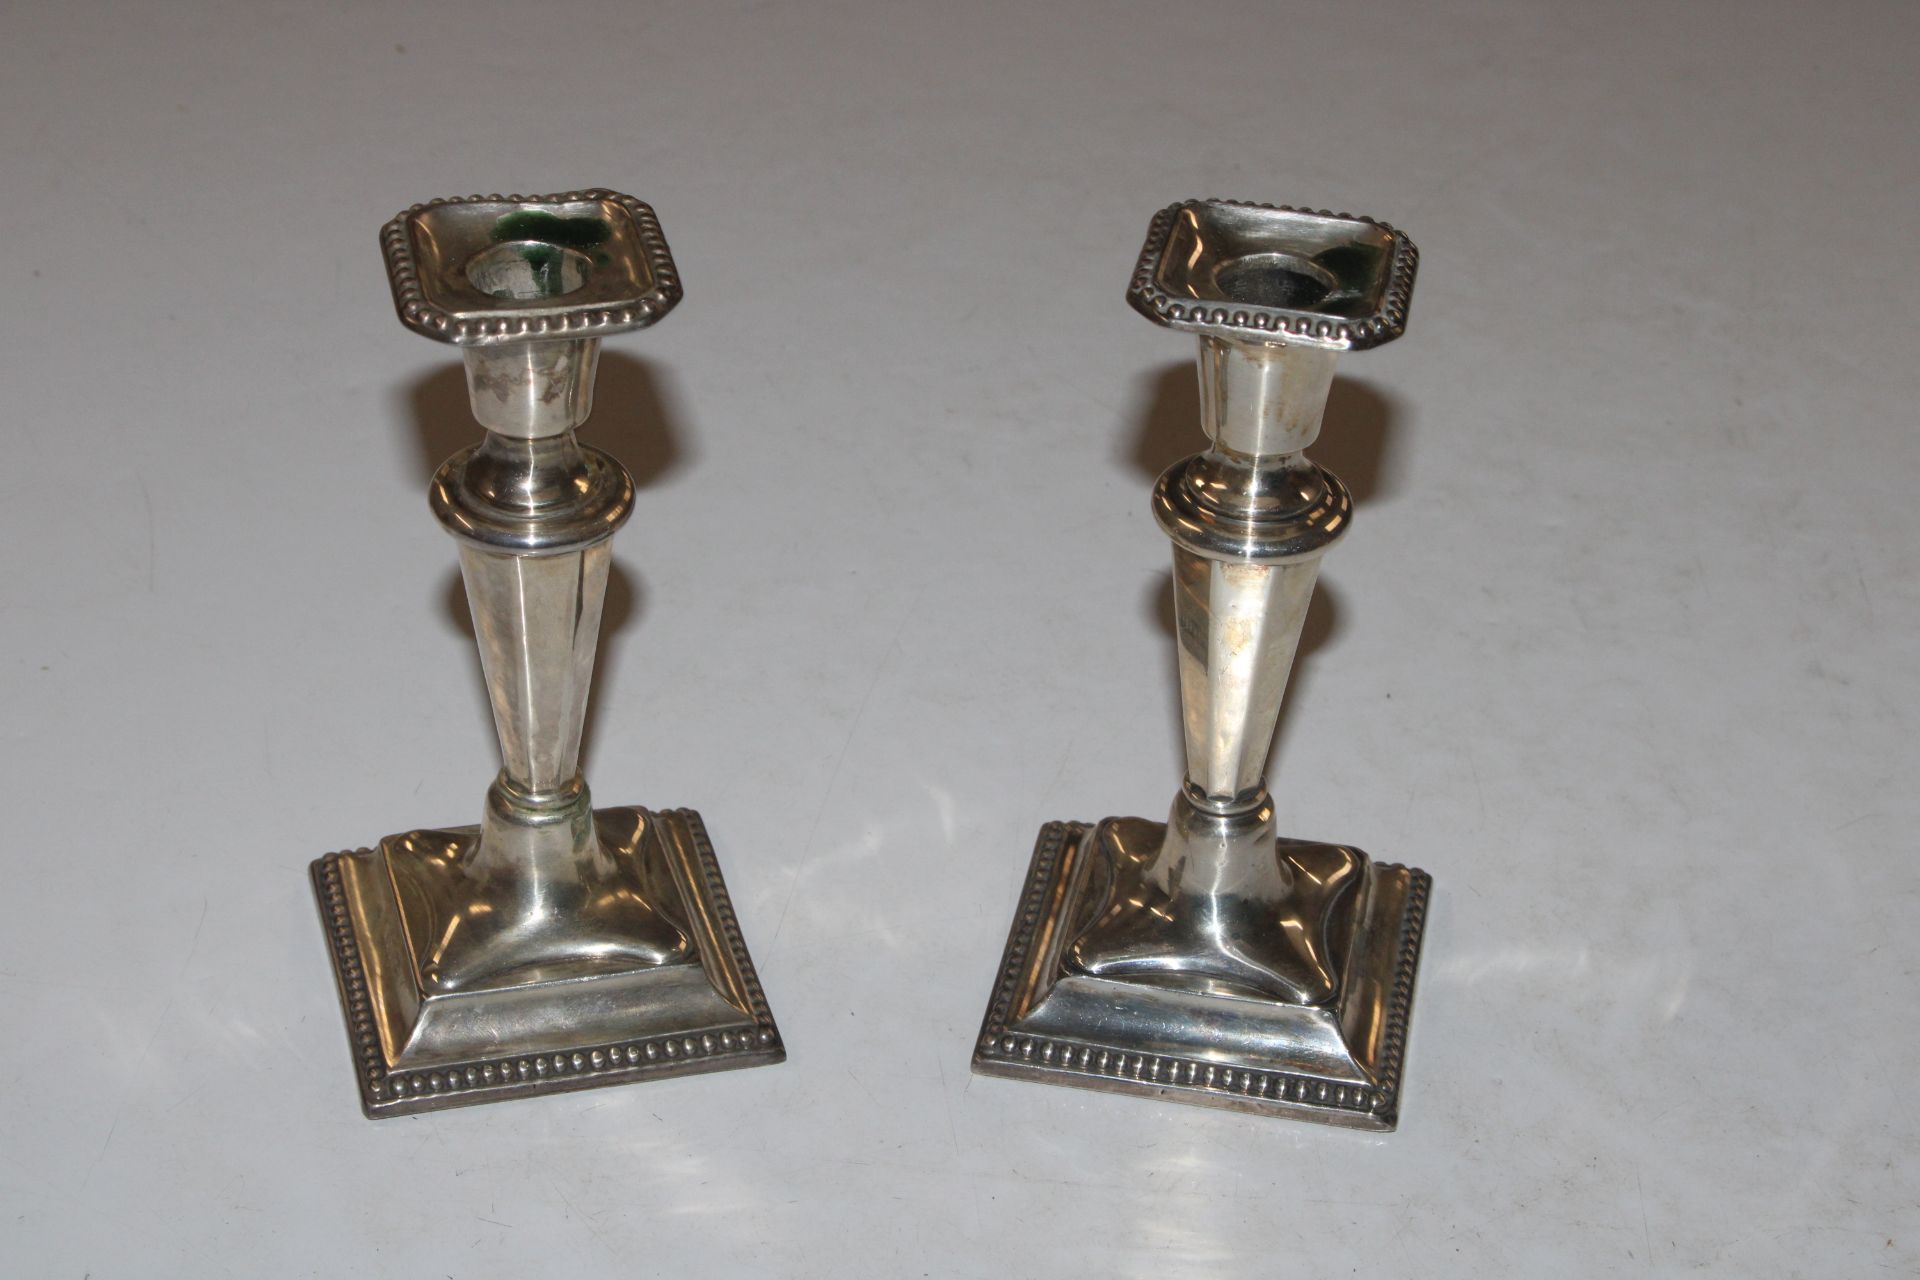 A pair of silver candlesticks with weighted bases